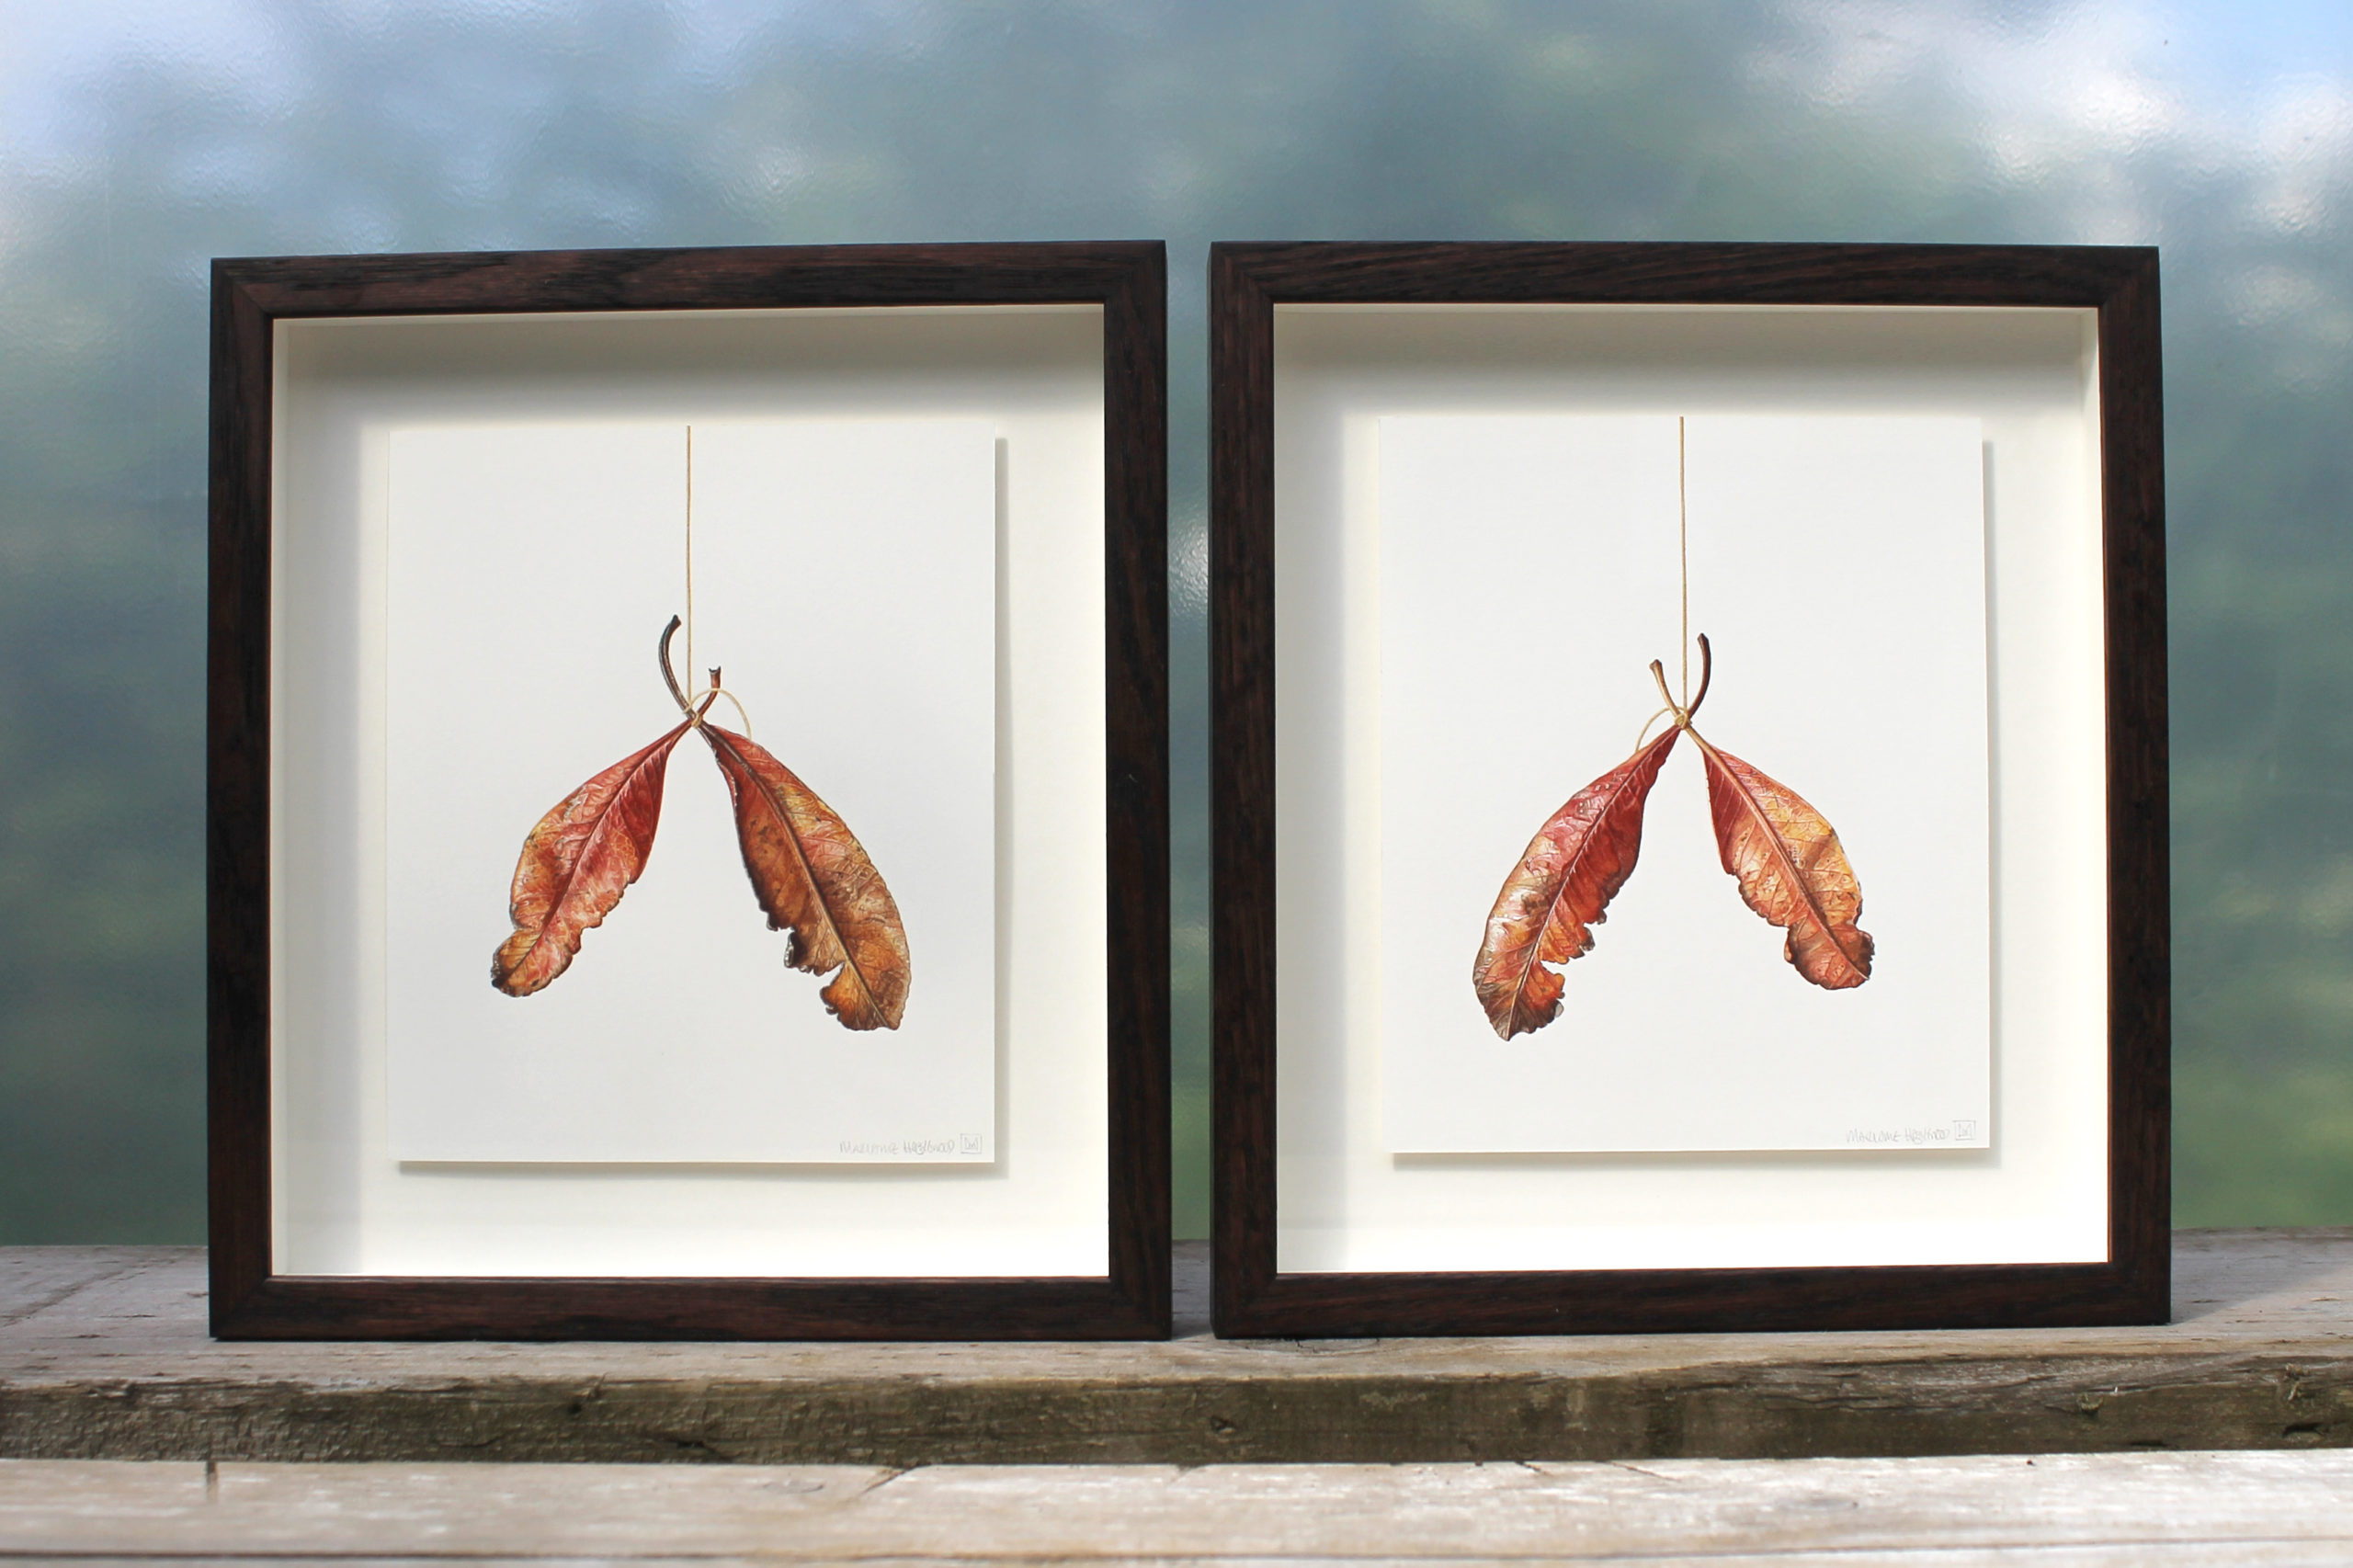 Wishbone leaf, watercolour paintings, cushion mounted in hand stained oak frames by Marianne Hazlewood